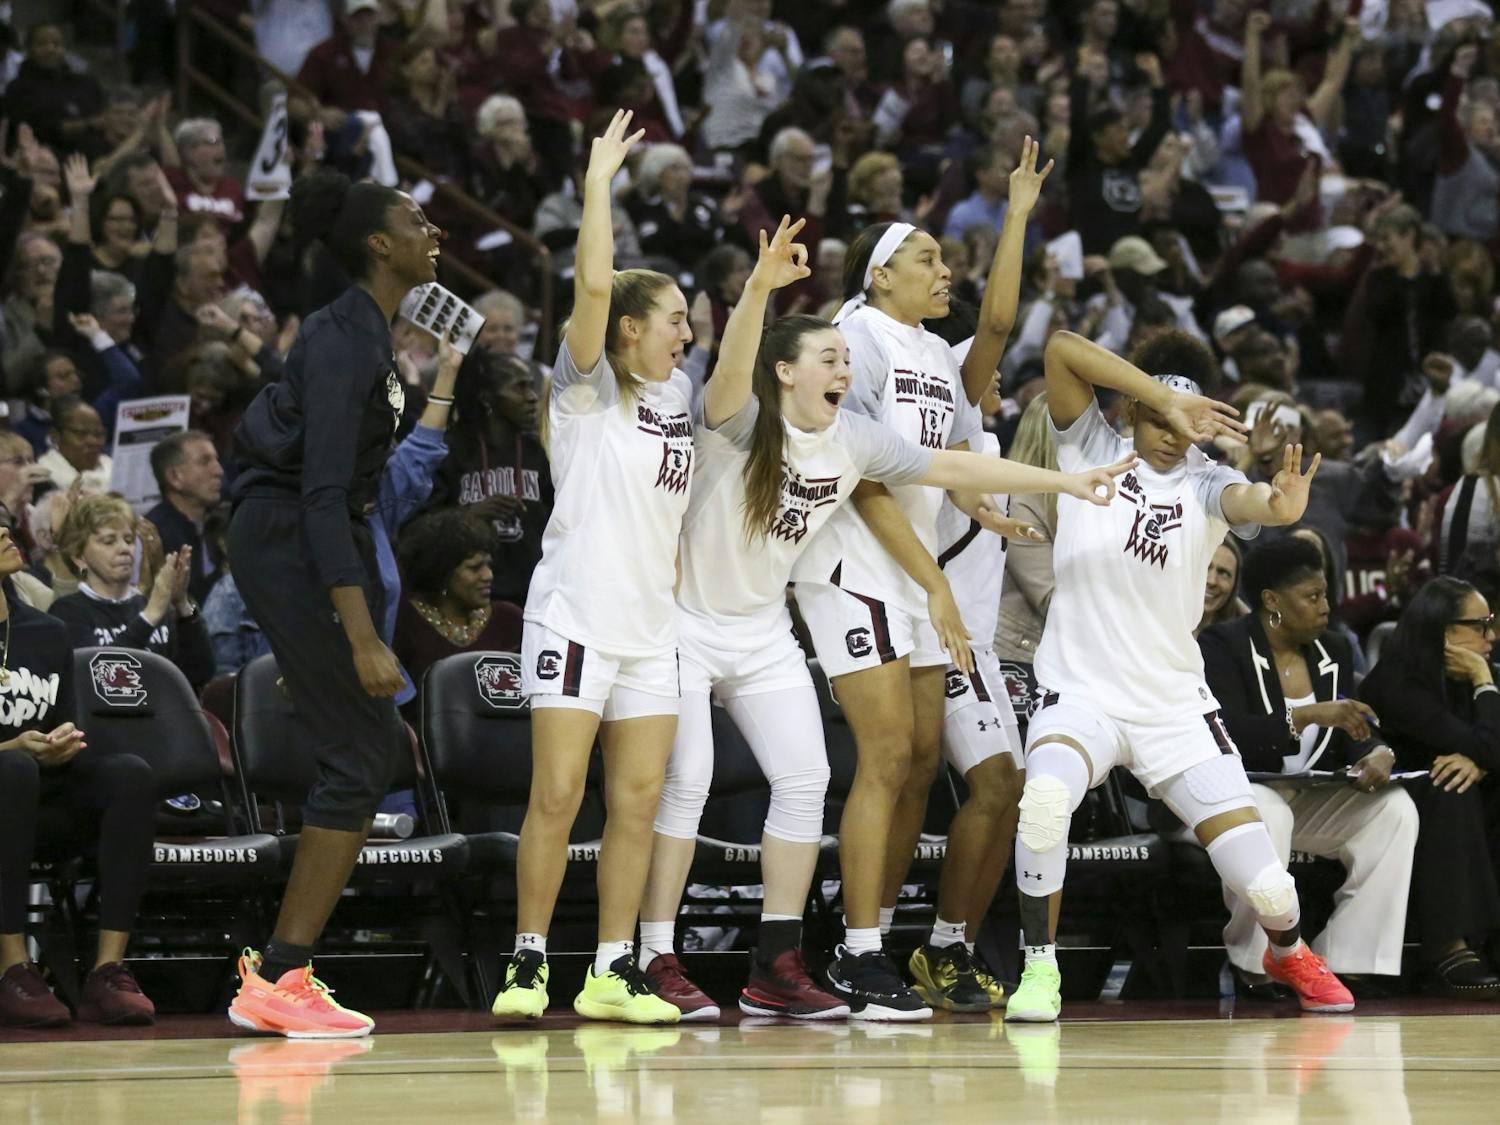 South Carolina’s bench celebrates after one of its players scored a 3-point shot during the second half. The Gamecocks had multiple 3-point shots to start the second half.